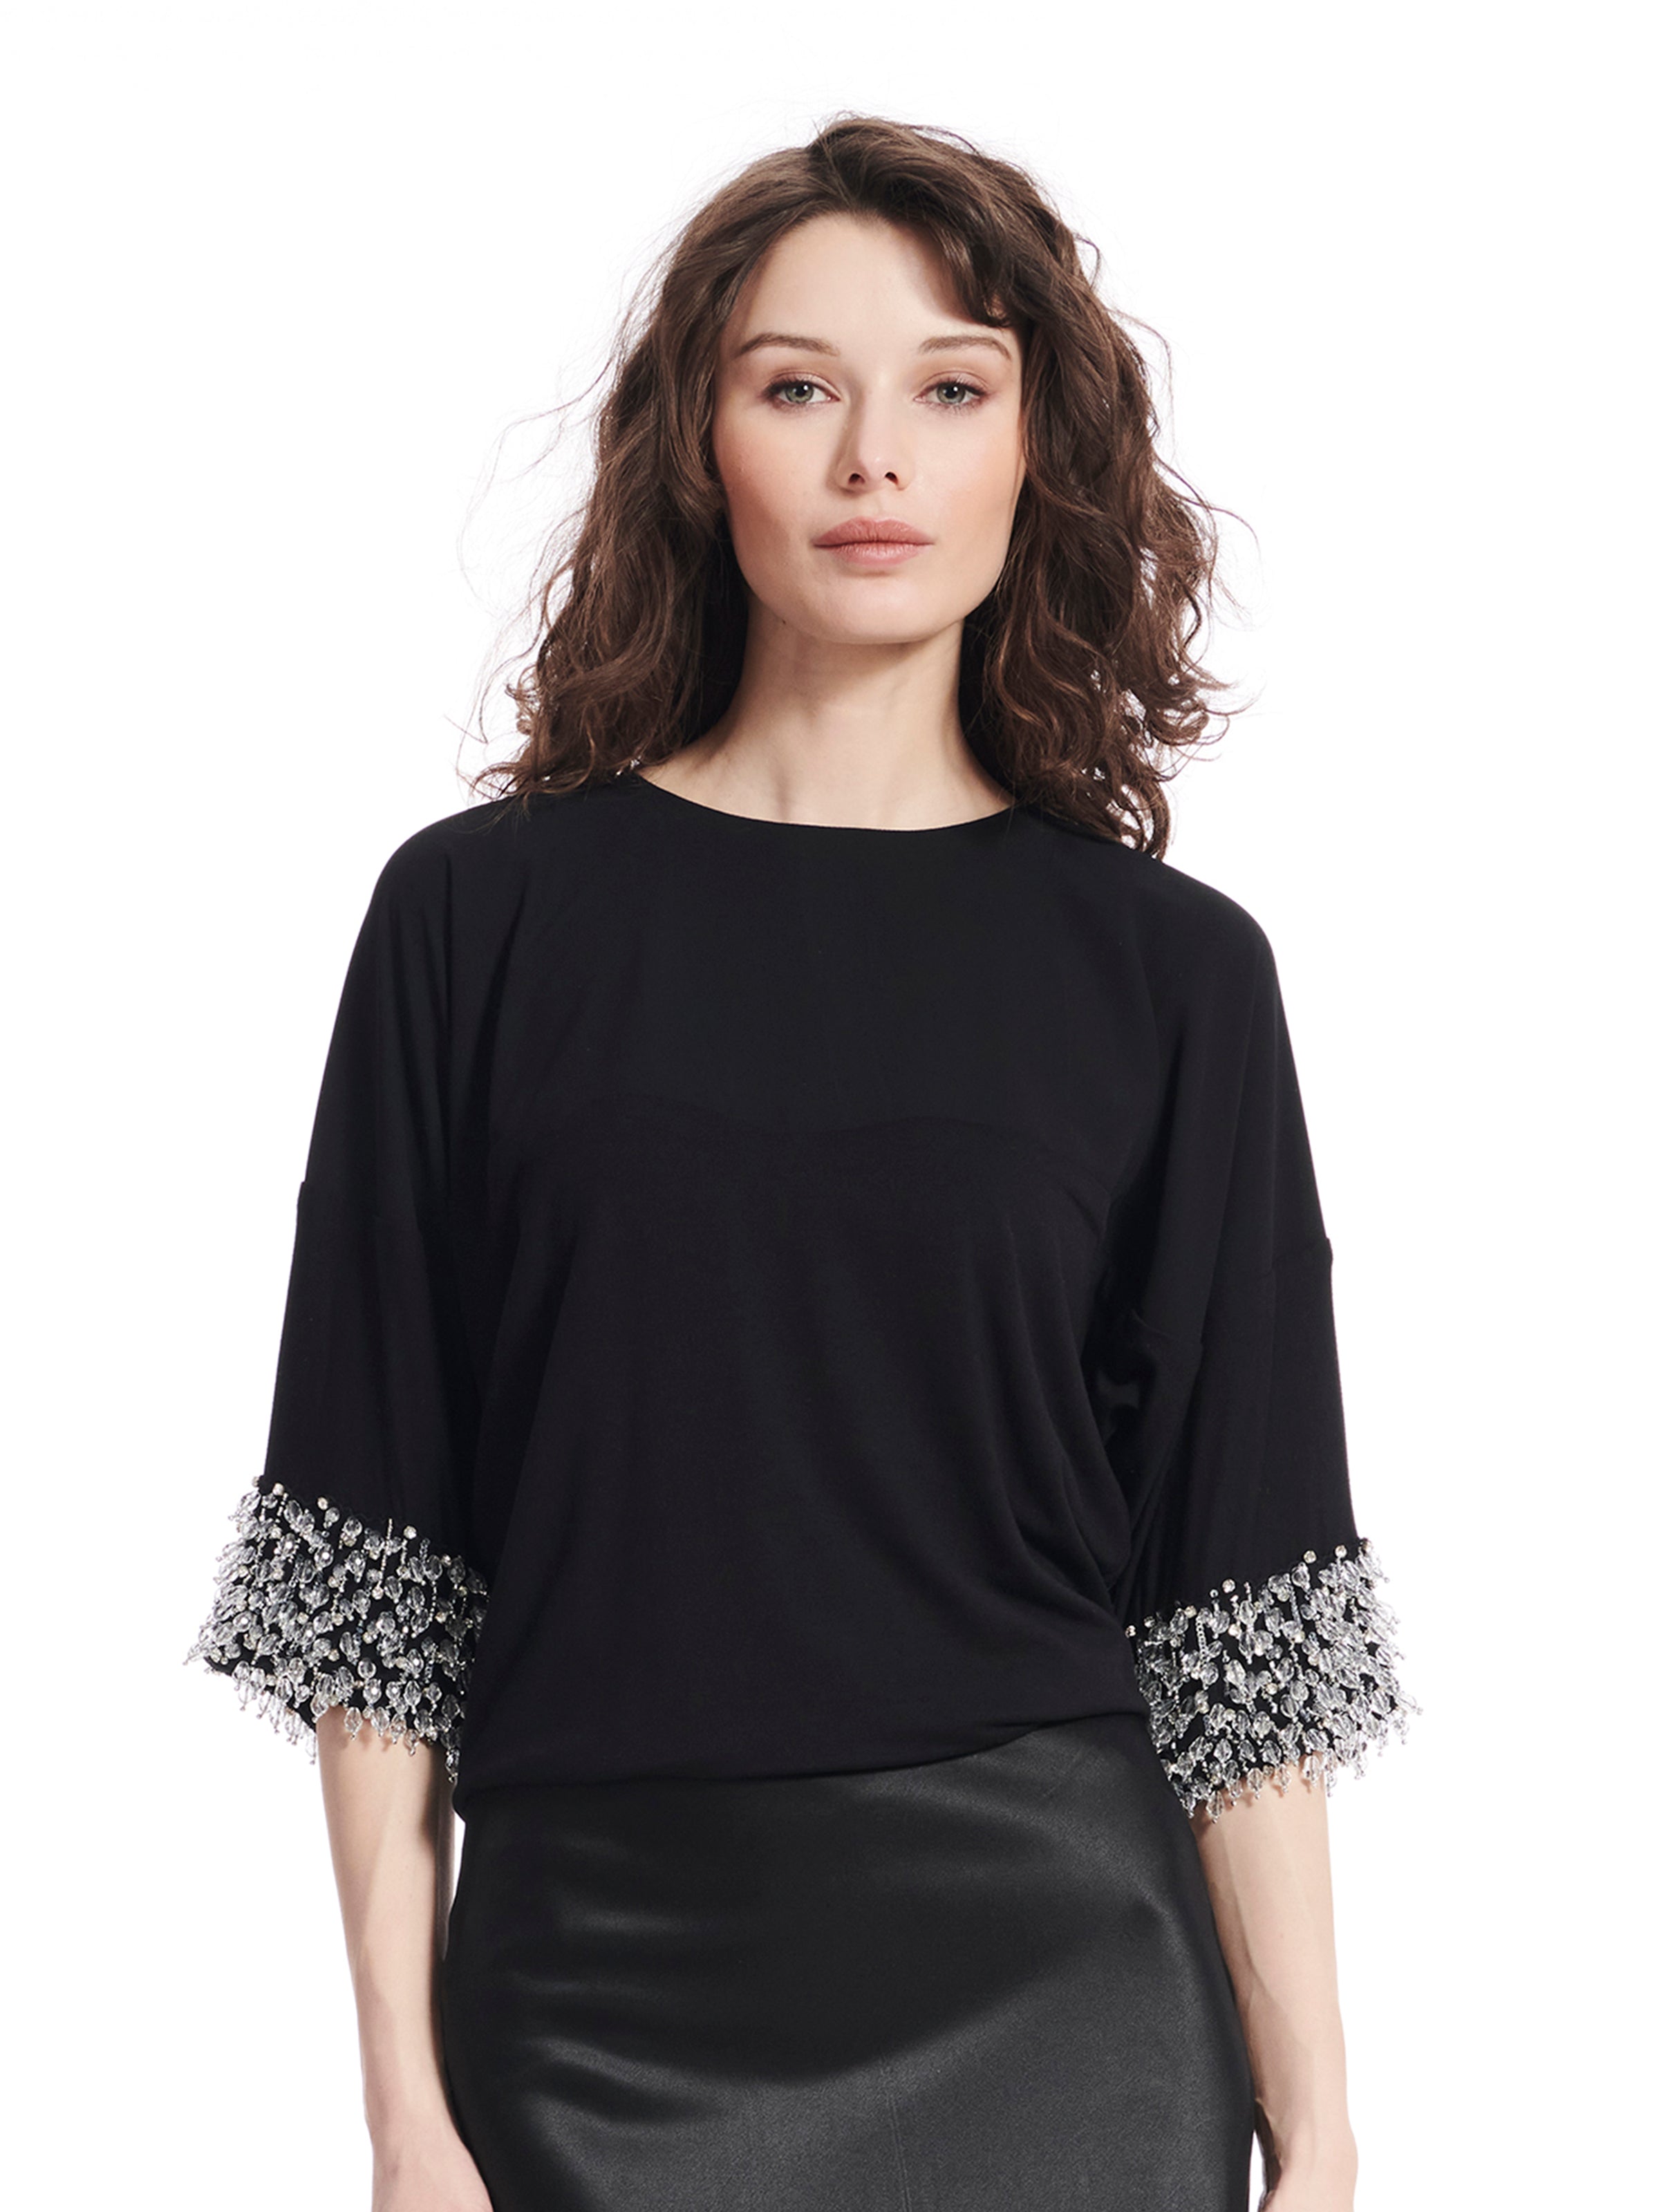 EVENING TOP WITH CRYSTAL SLEEVE DETAIL